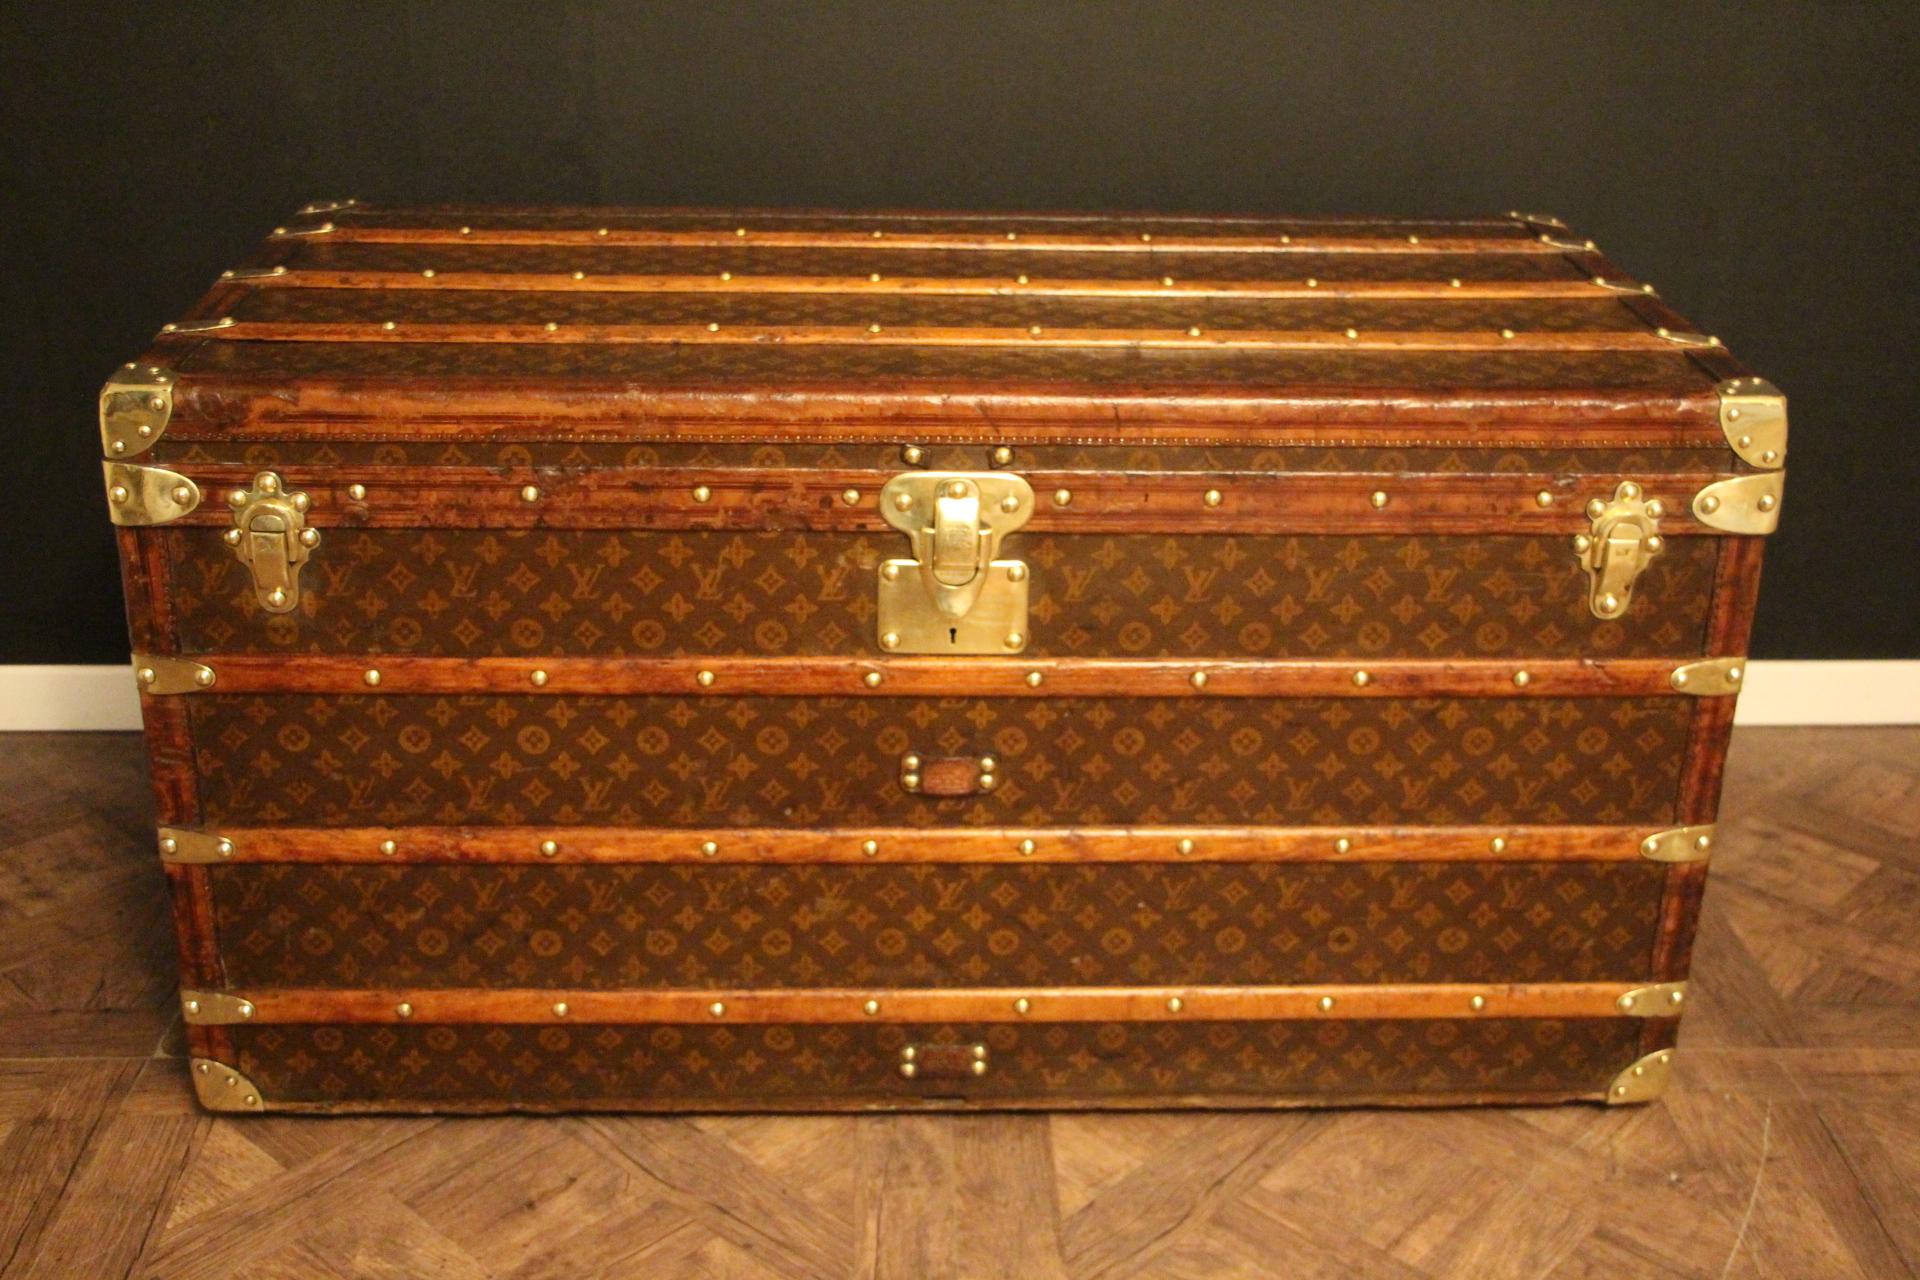 This superb Louis Vuitton steamer trunk features stenciled monogram canvas, deep chocolate color leather trim, LV stamped solid brass locks and studs as well as solid brass side handles and brass corners. It has got a beautiful original warm patina